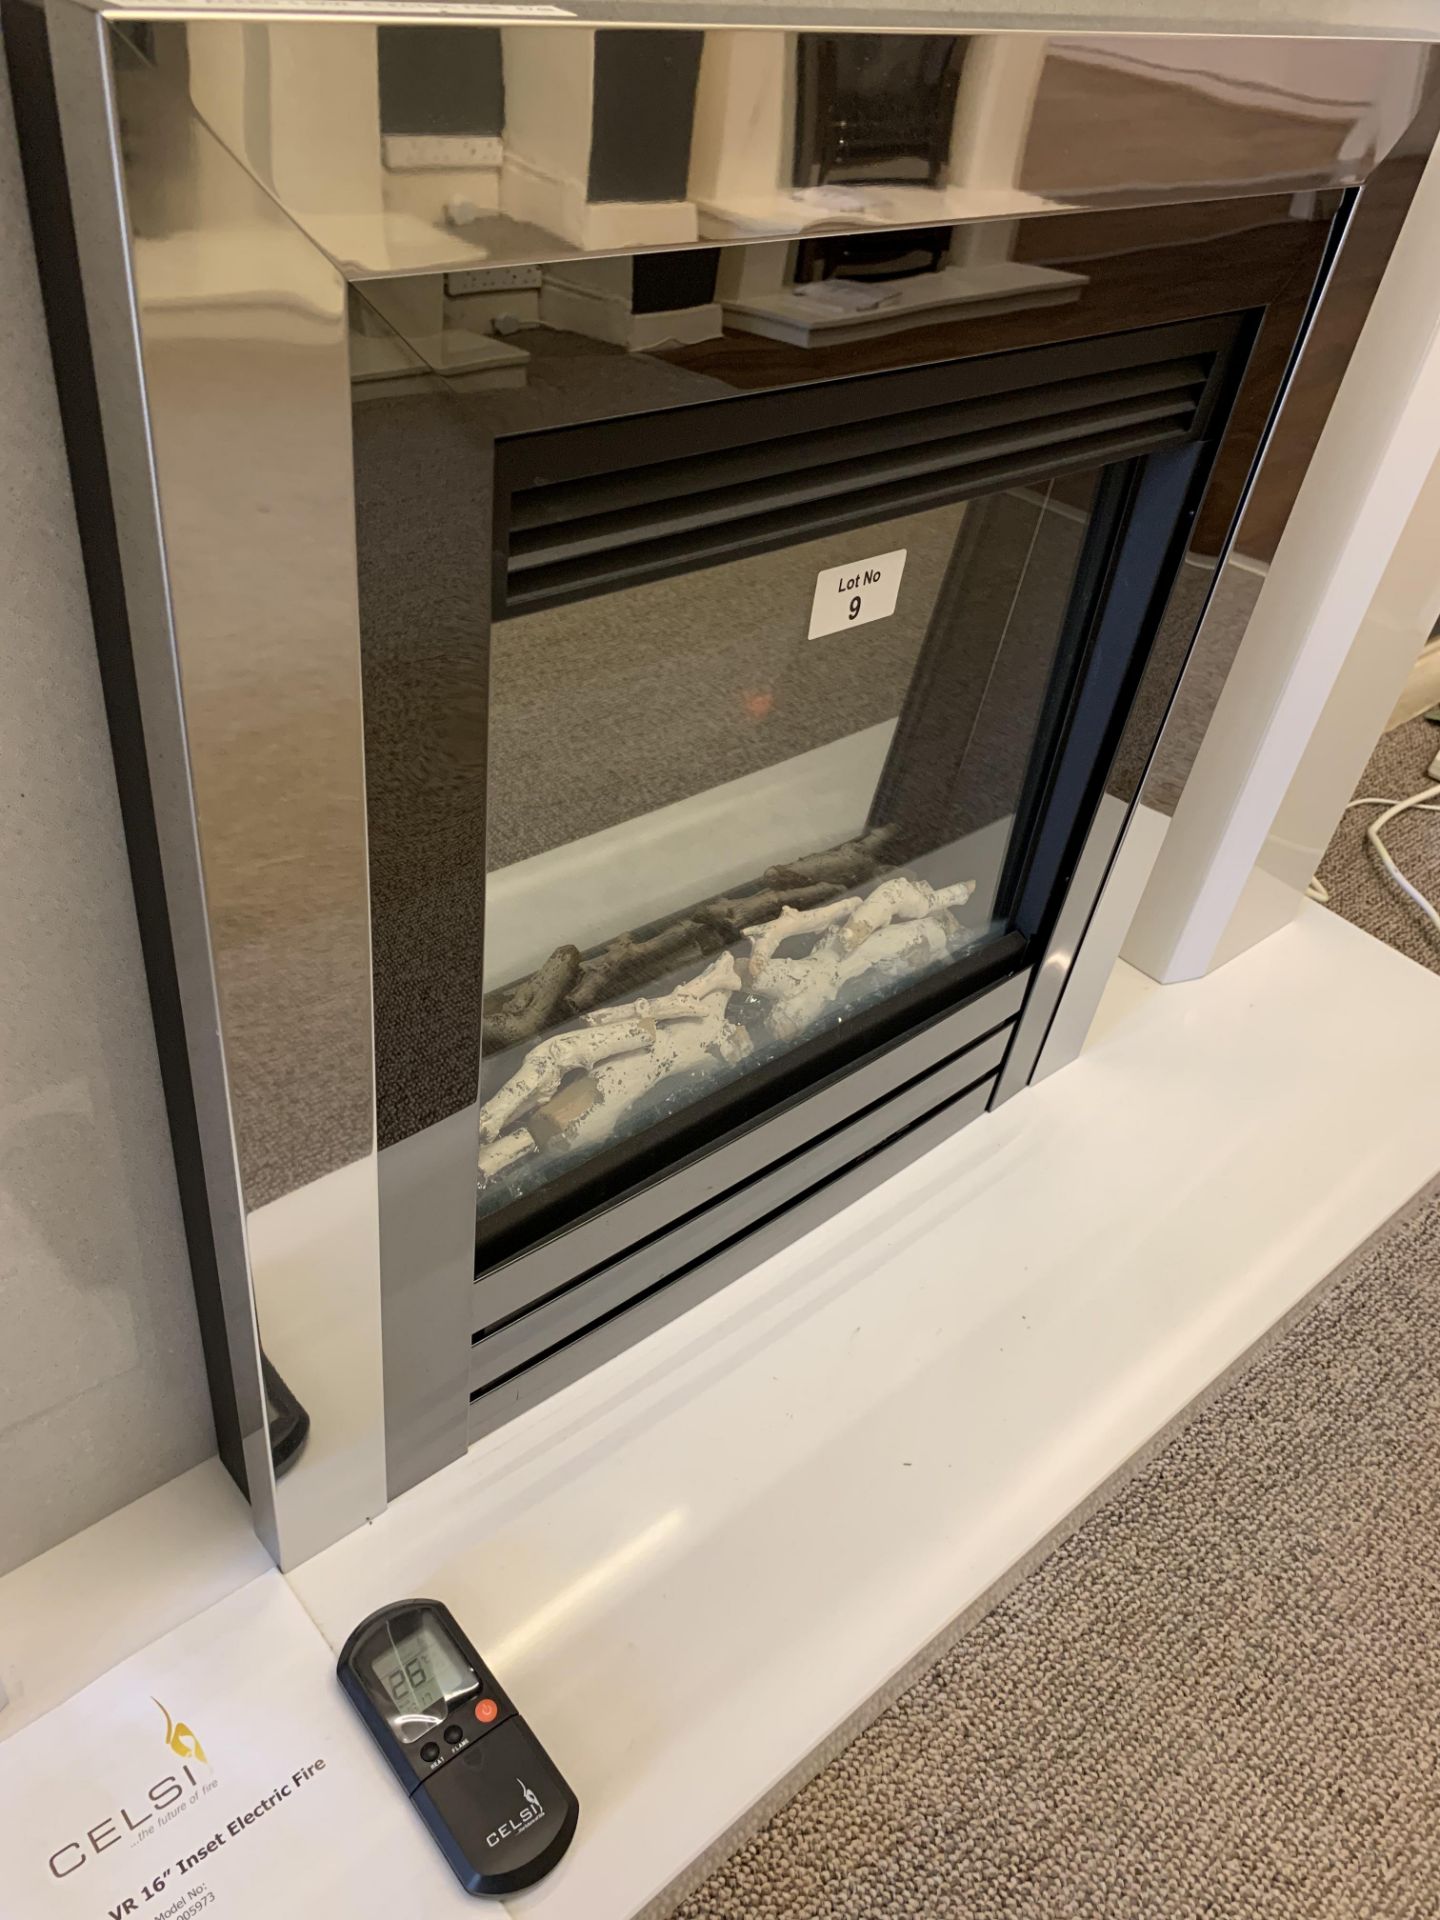 Celsi 1.5 kw VR 16" Inset electric fire - Image 2 of 3